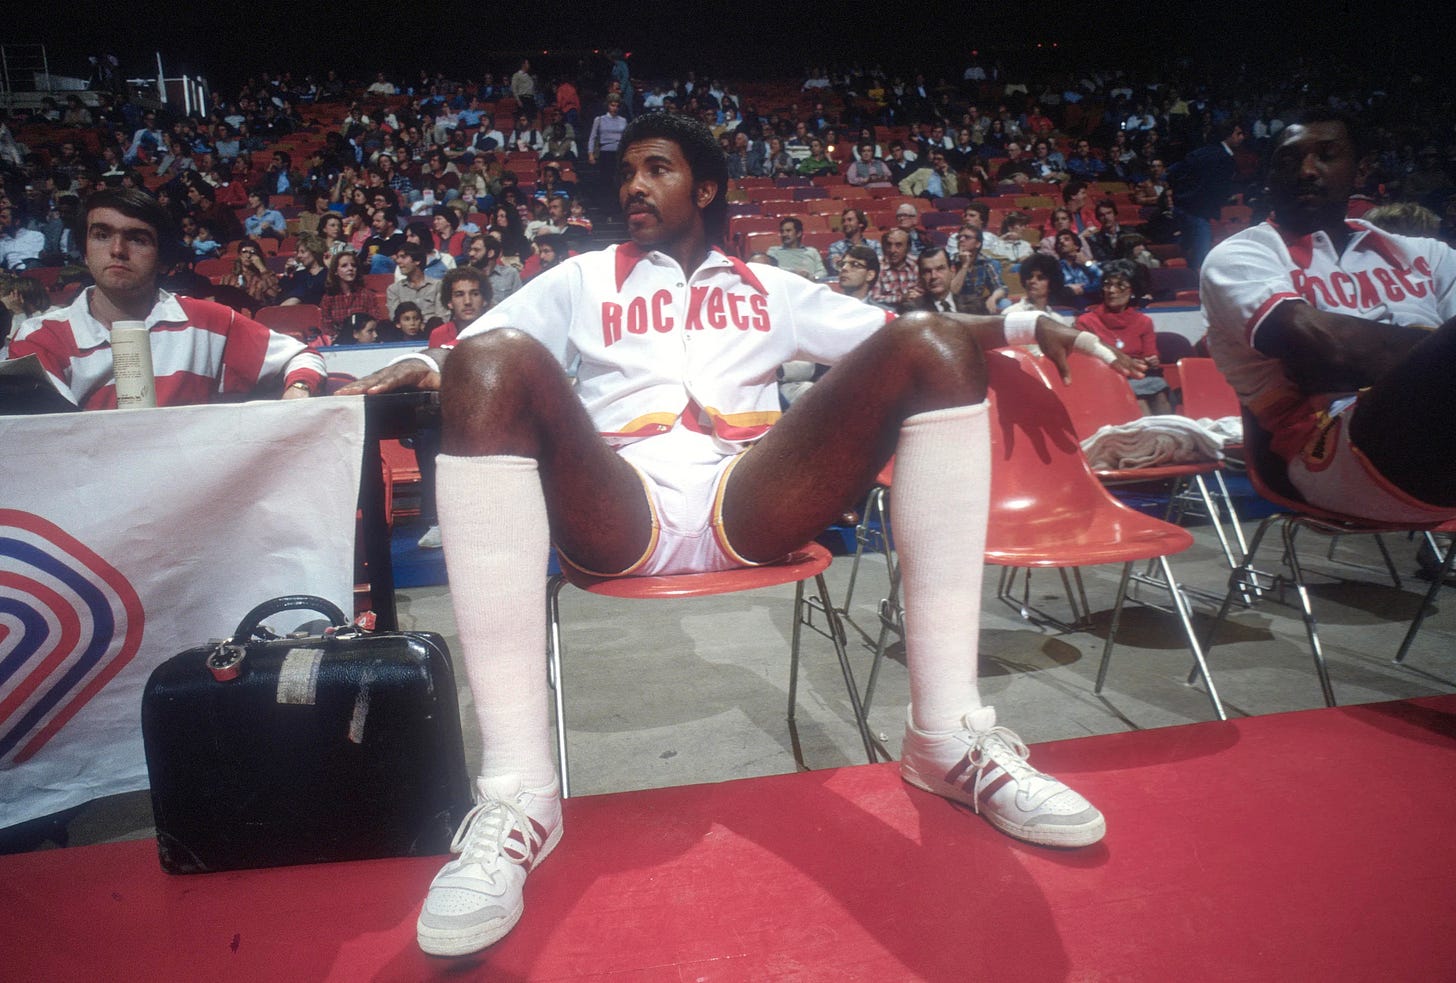 Robert Reid helped lead the Rockets to their first two NBA Finals appearances in franchise history.